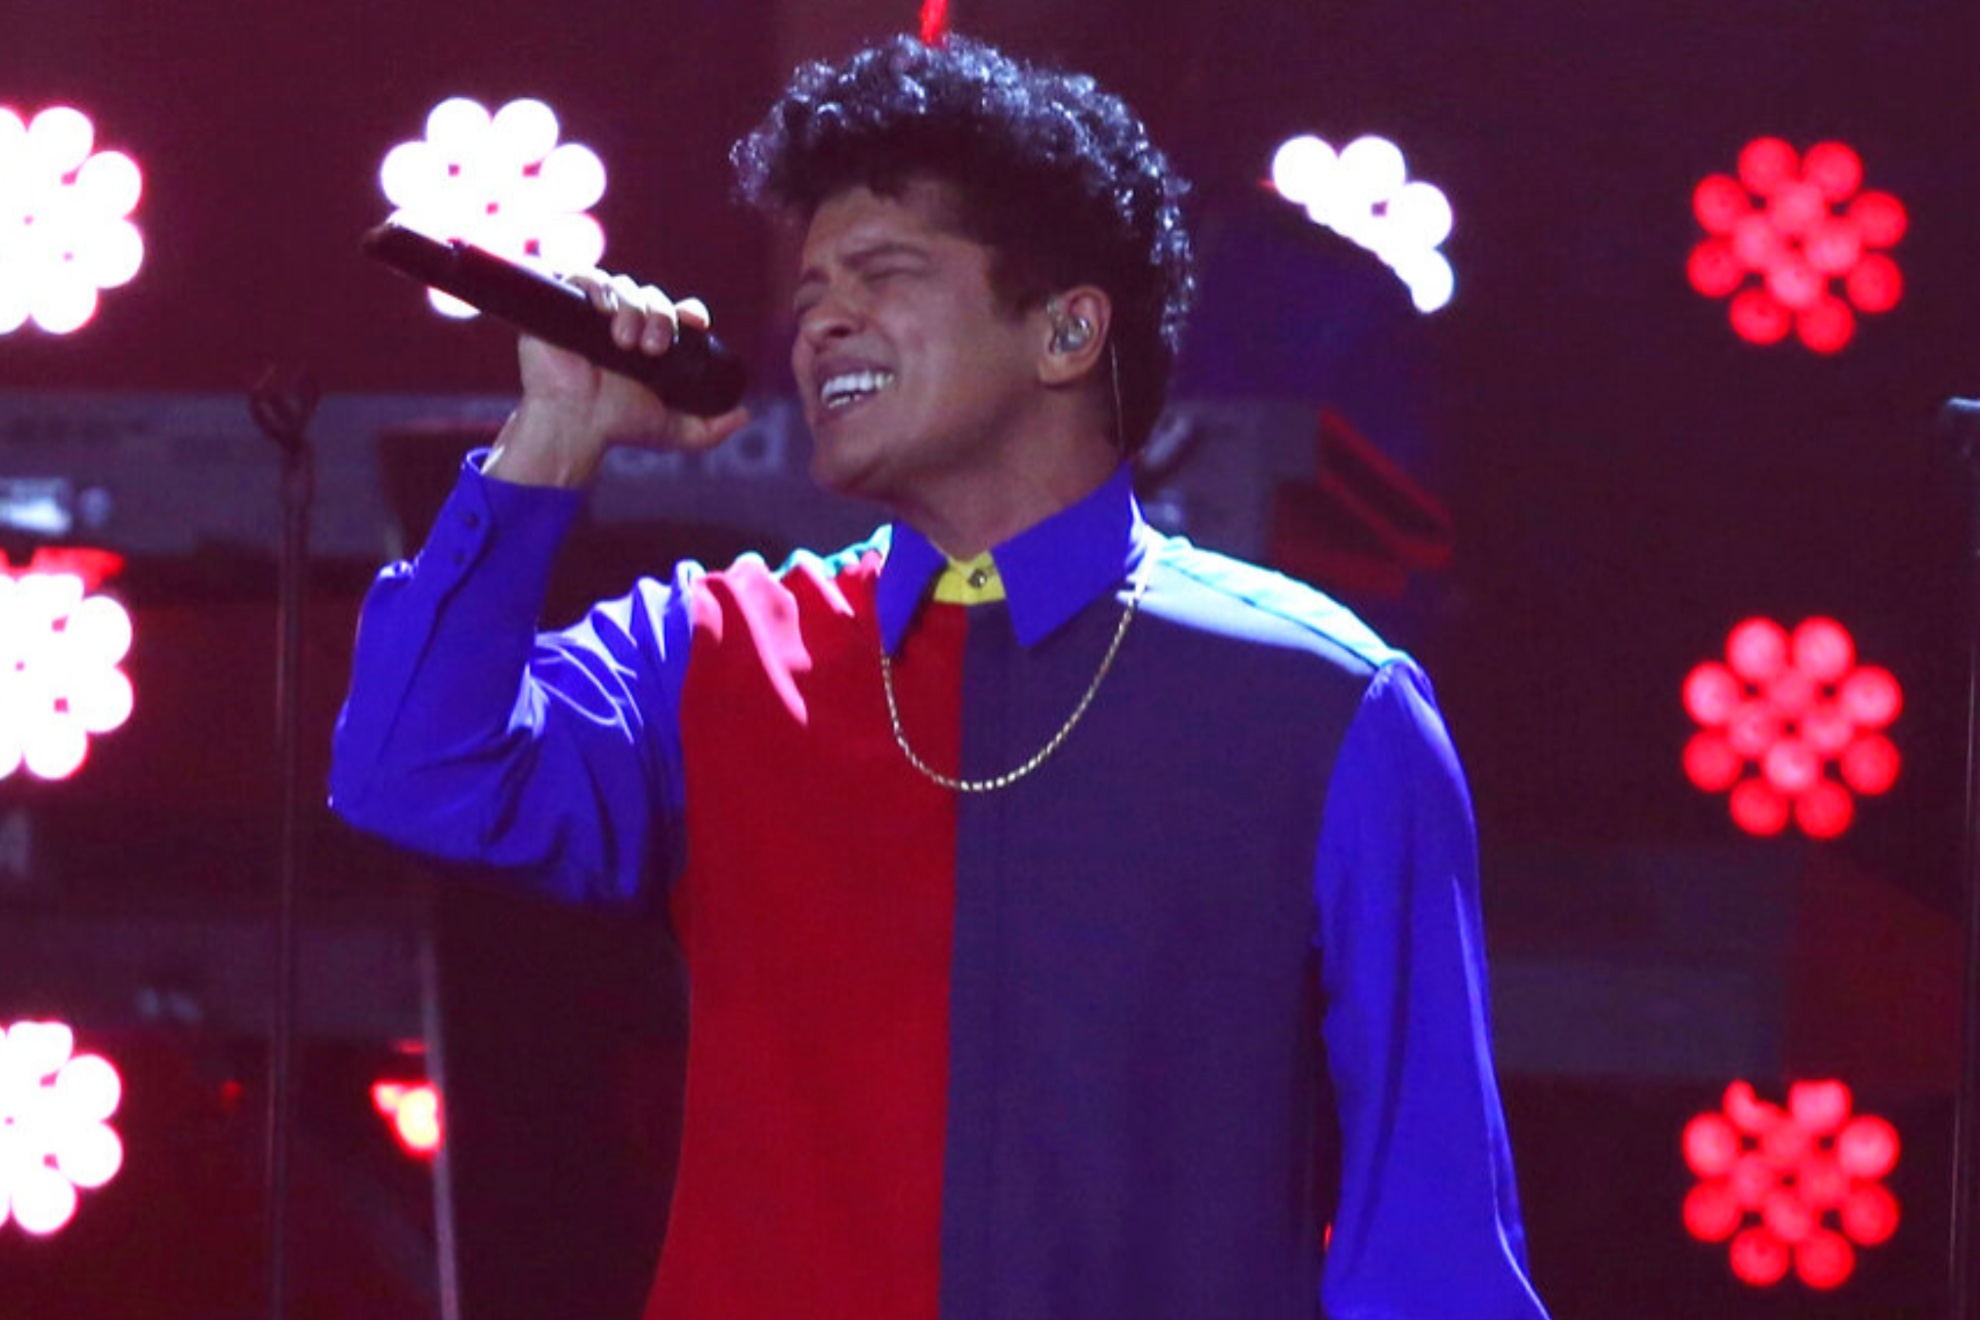 Bruno Mars supposedly has a $50 million gambling bet with MGM